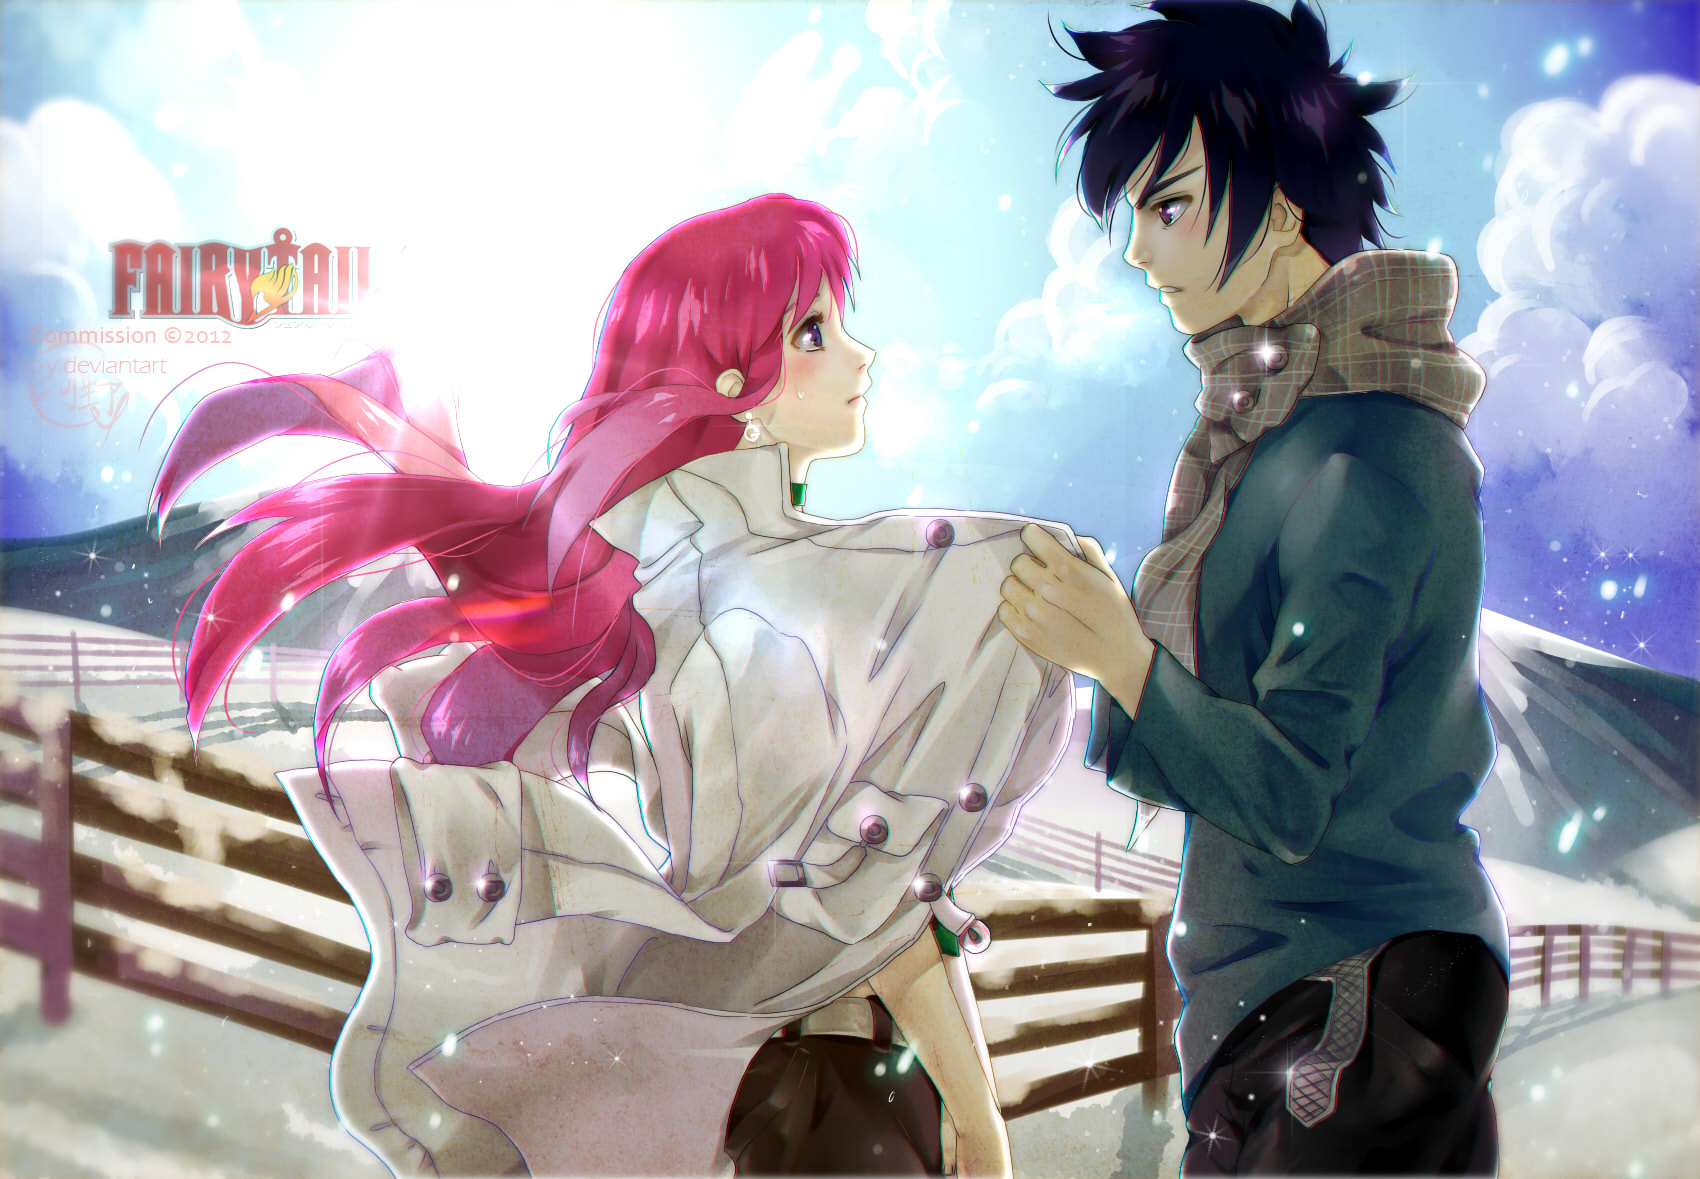 Anime Fairy Tail Wallpaper by C-Y